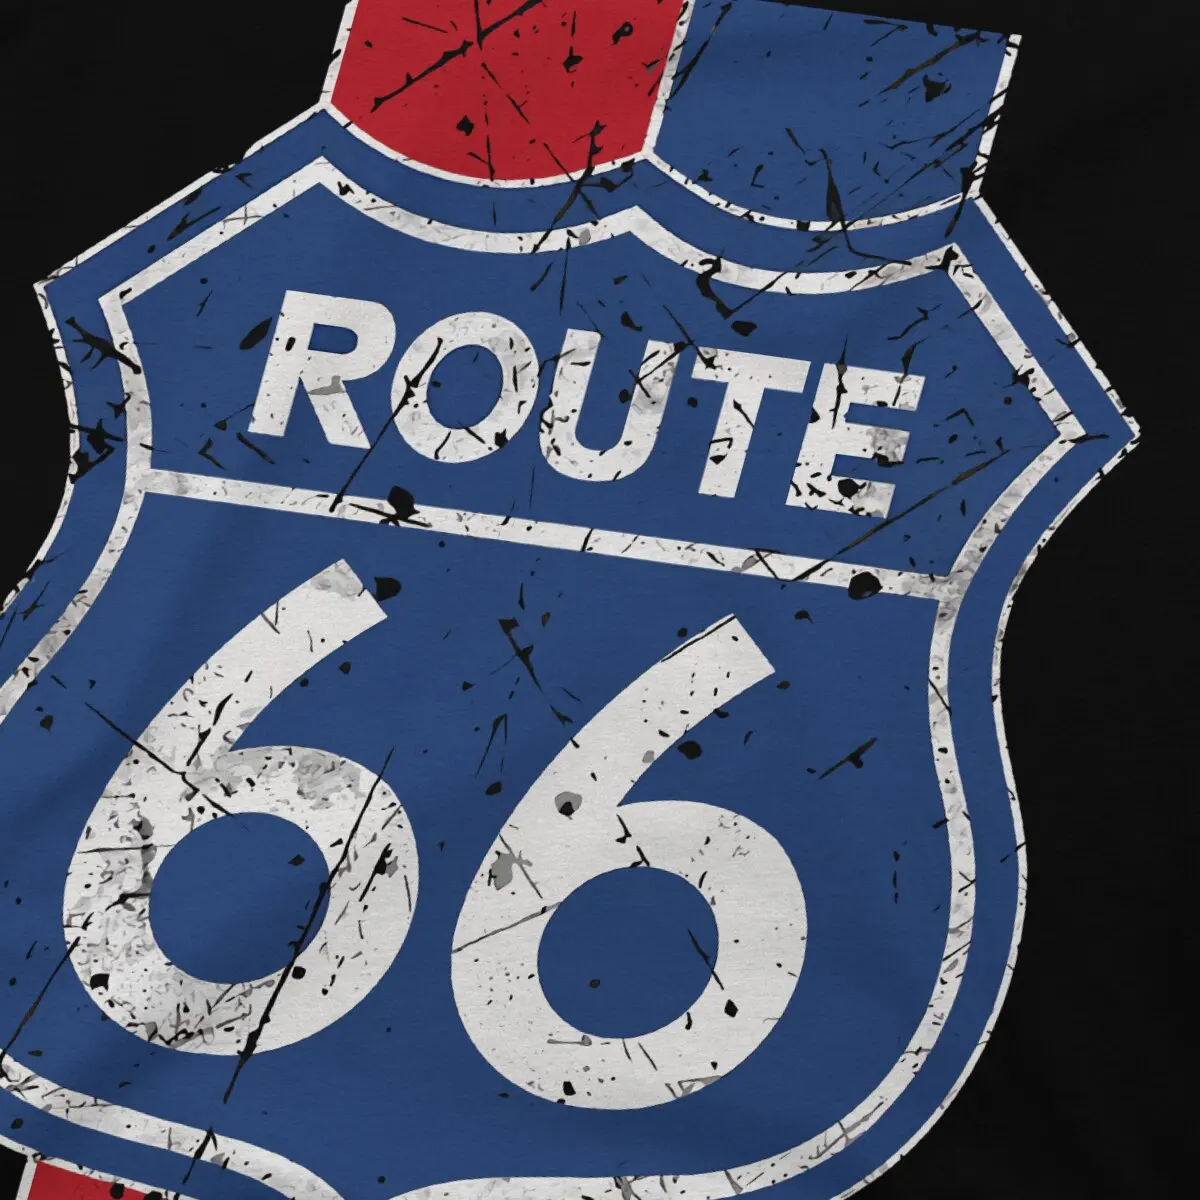 U S Route 66 Пътен знак T Shirt Graphic Men Tees Summer Clothing Polyester O-Neck TShirt